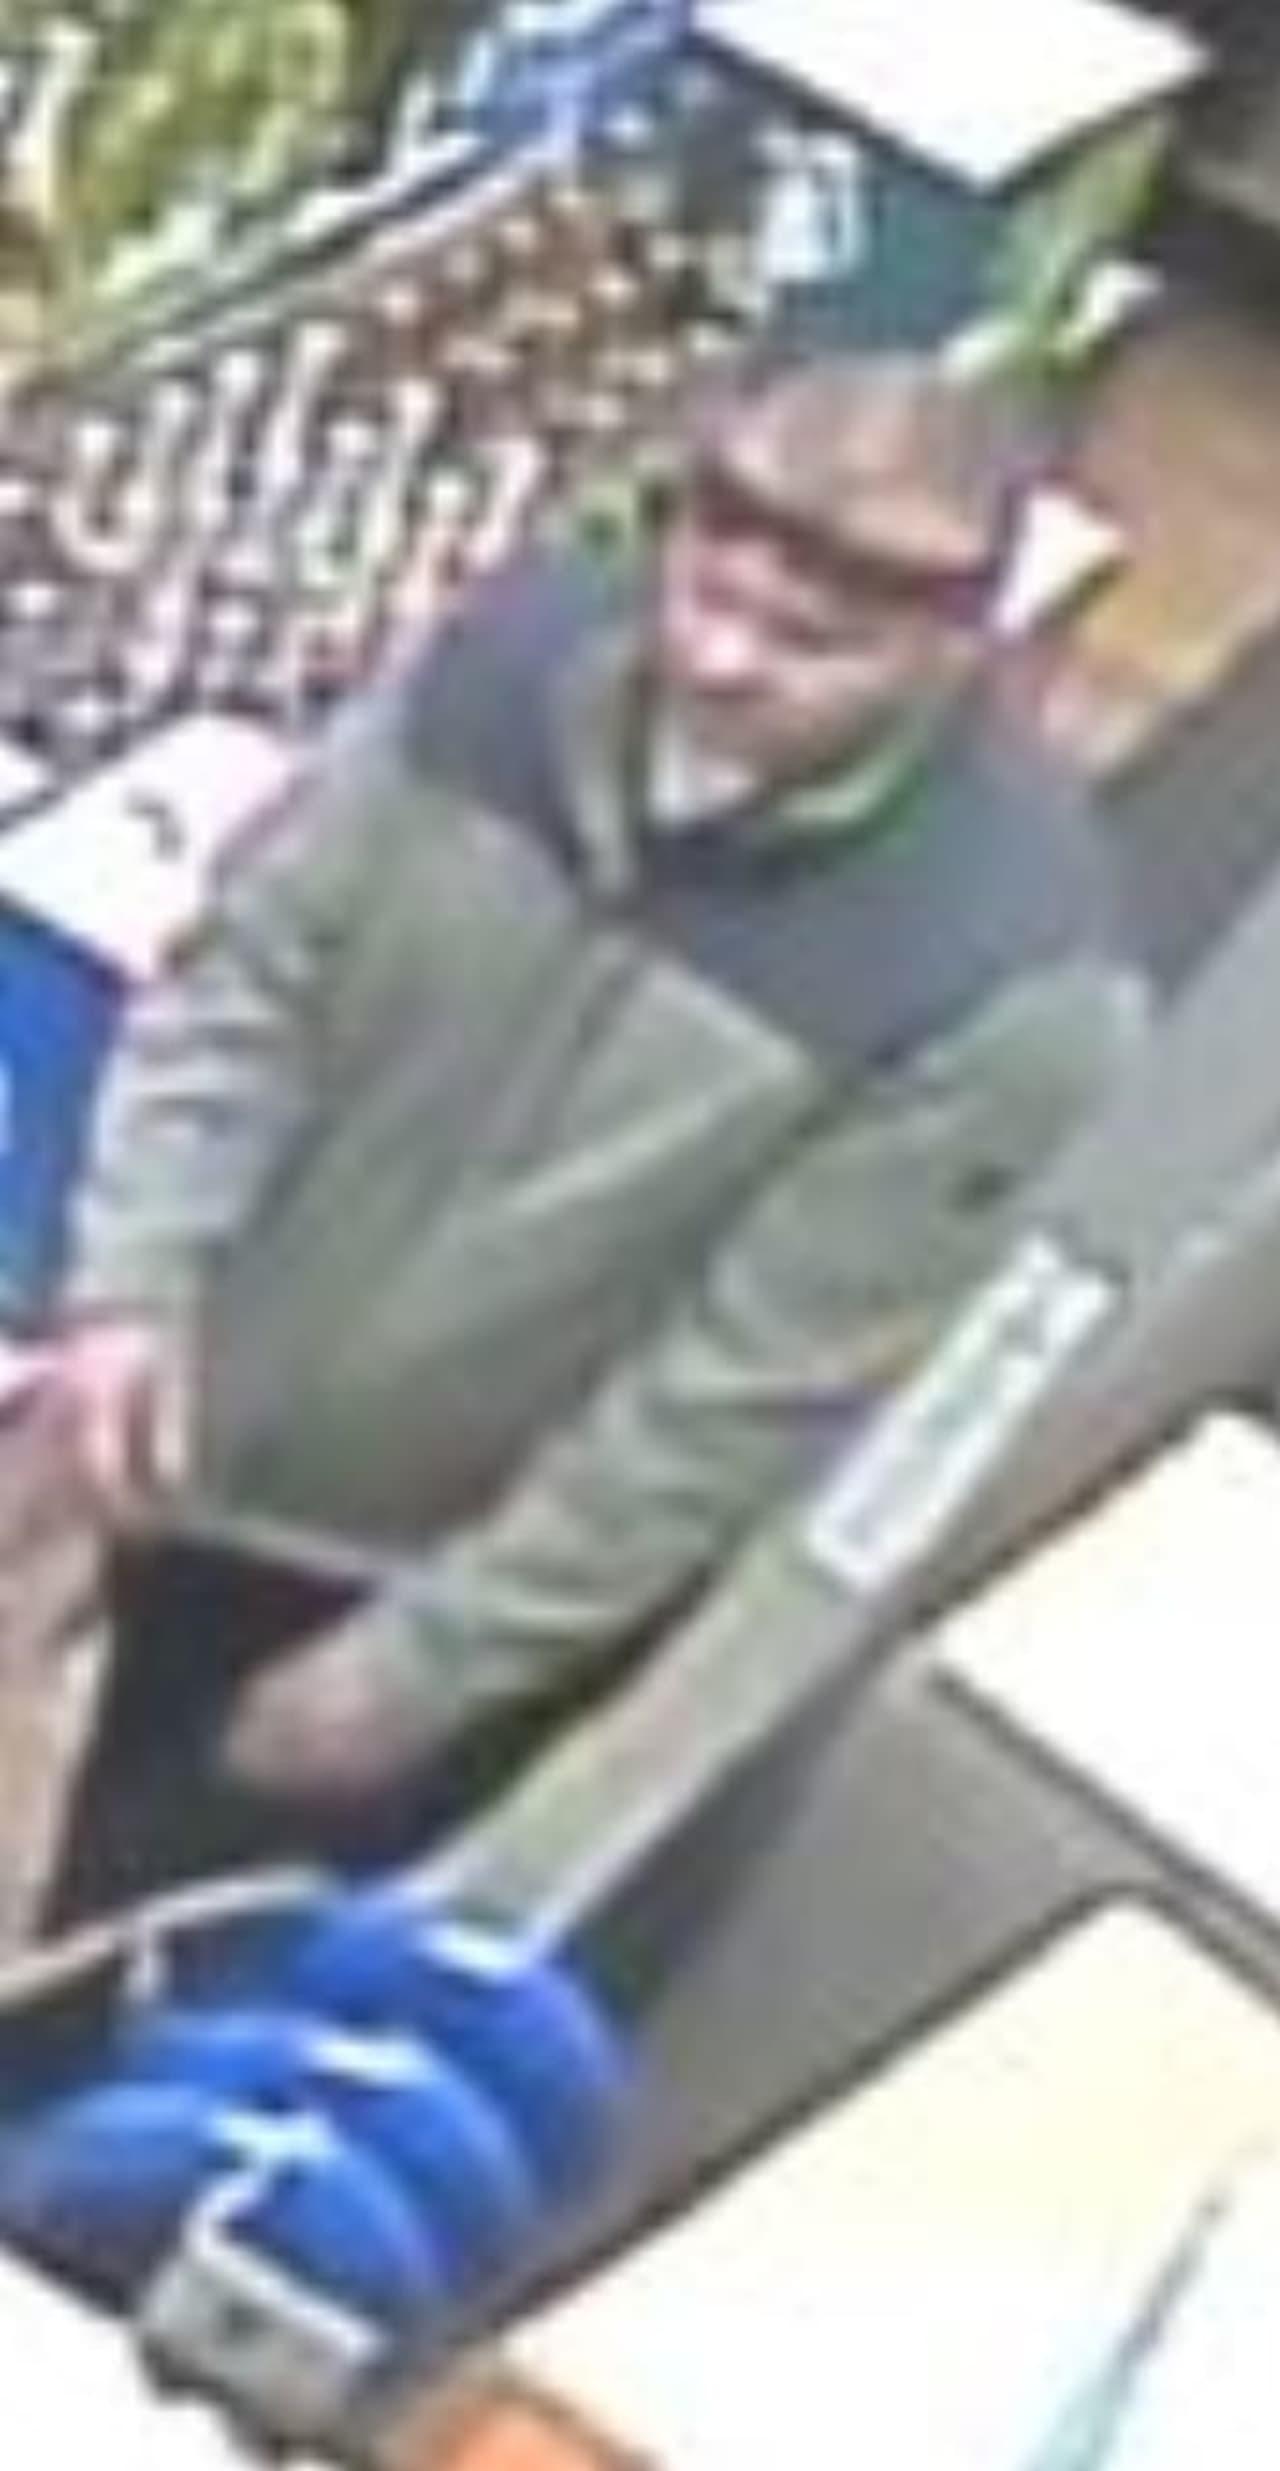 Police are attempting to locate a man who allegedly stole vodka from a Kings Park liquor store.